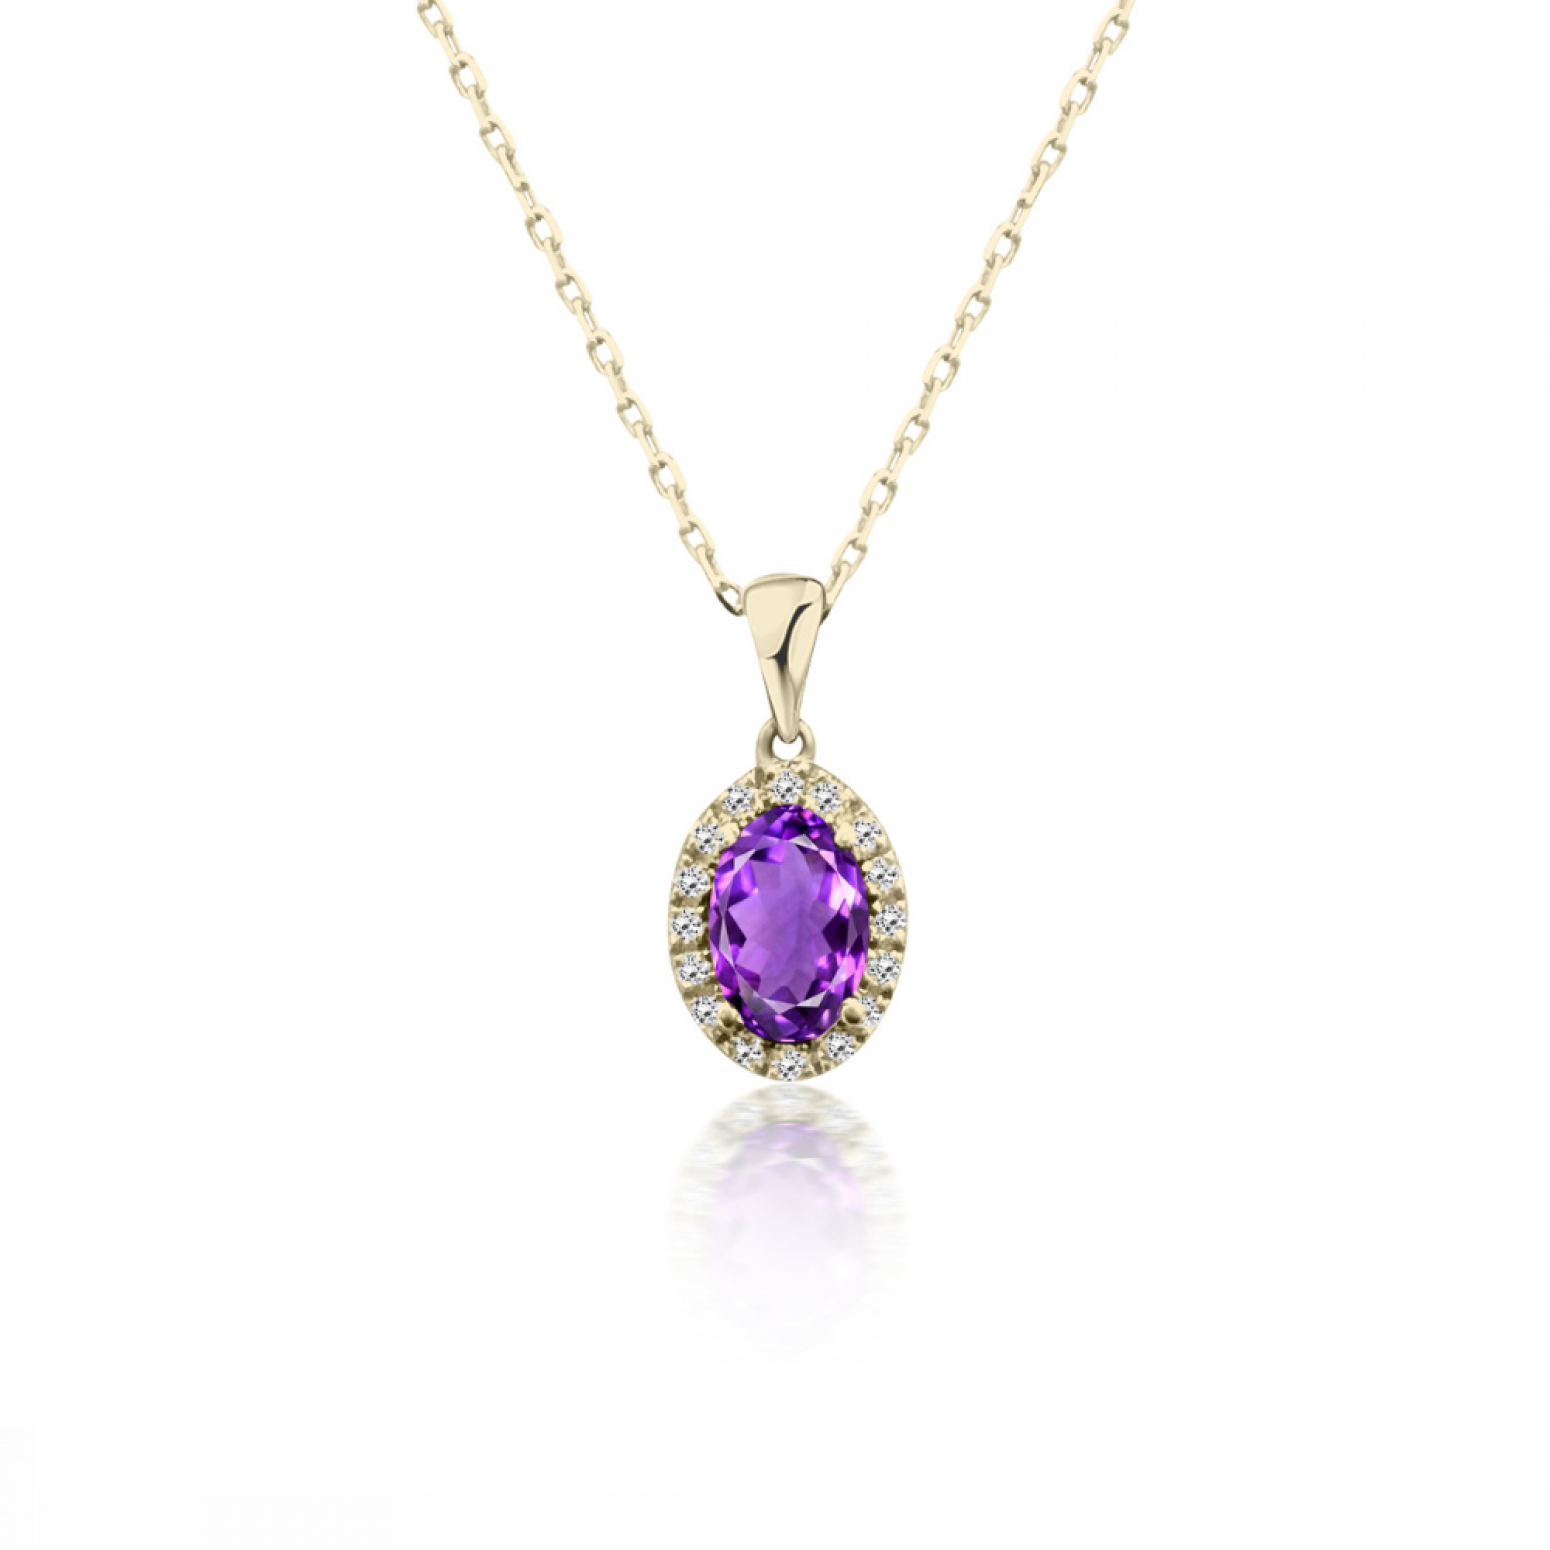 Solitaire necklace 18K gold with amethyst 0.34ct and diamonds 0.07ct, ko5943 NECKLACES Κοσμηματα - chrilia.gr